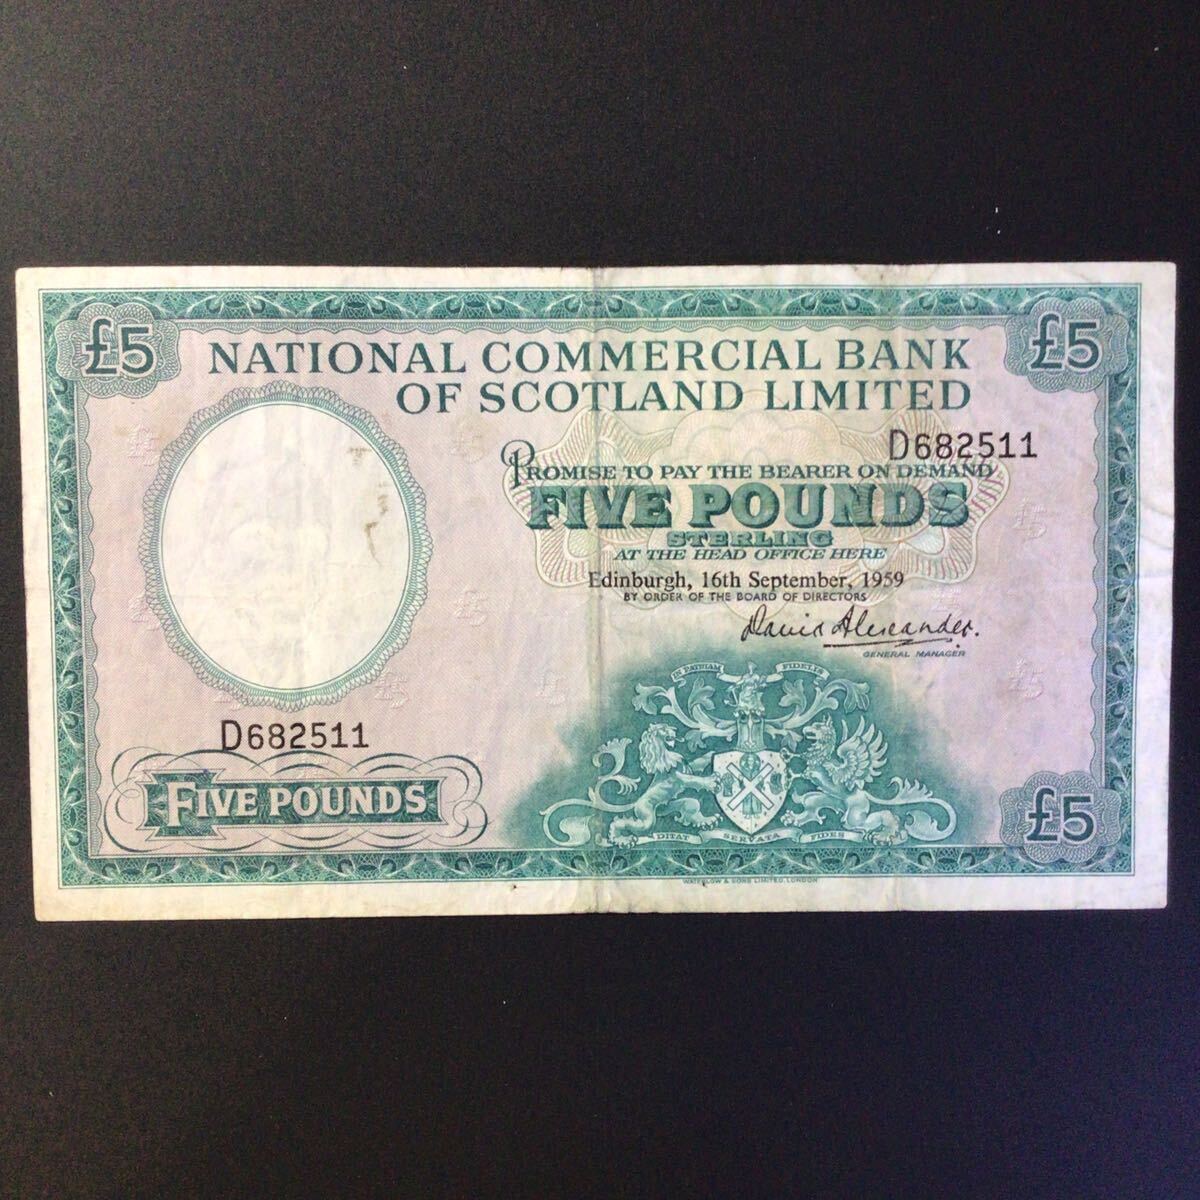 World Paper Money SCOTLAND《National Commercial Bank of Scotland Limited》 5 Pounds【1959】の画像1